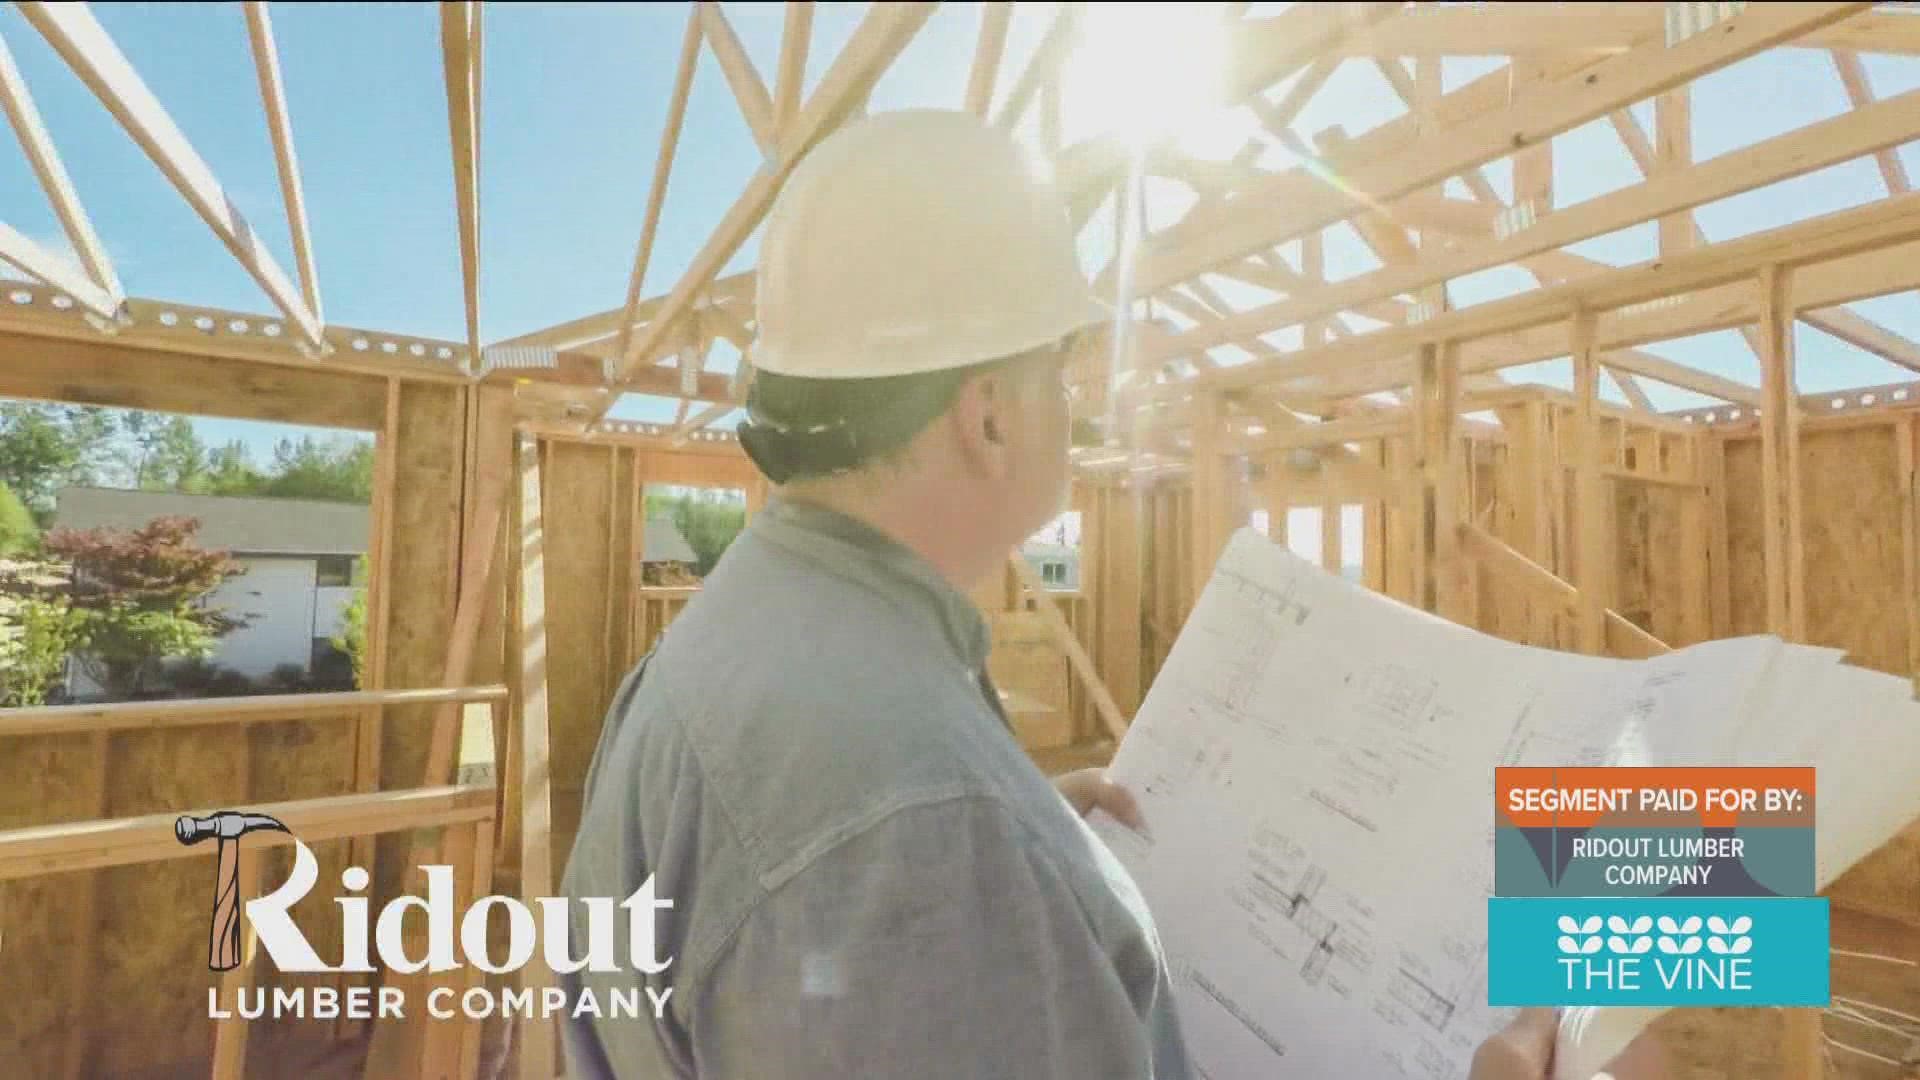 SEGMENT PAID FOR BY: Ridout Lumber Company. Learn more at ridoutlumber.com!